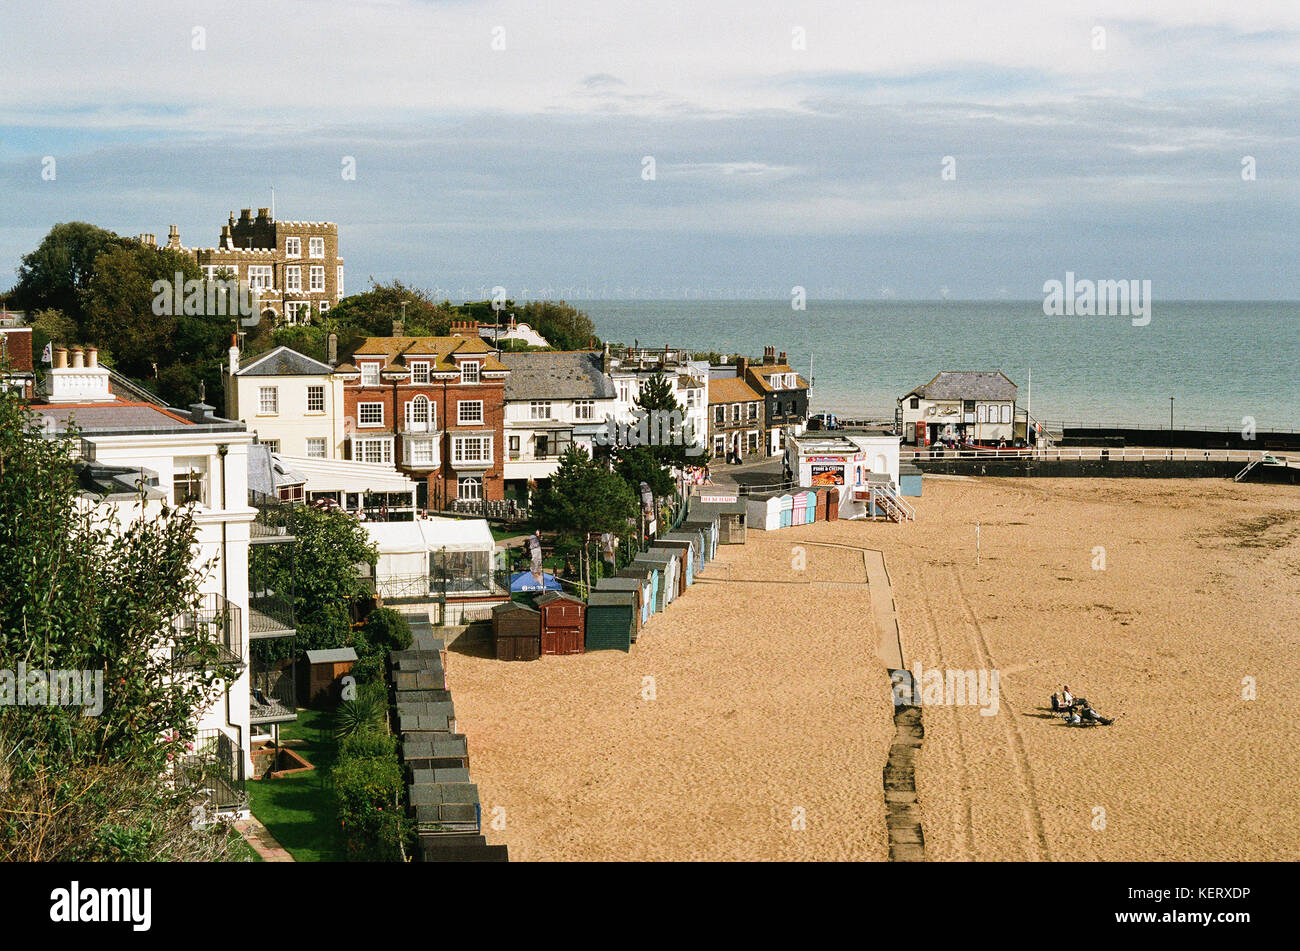 Houses at Broadstairs, Thanet, on the Kent coast, looking towards the sea Stock Photo